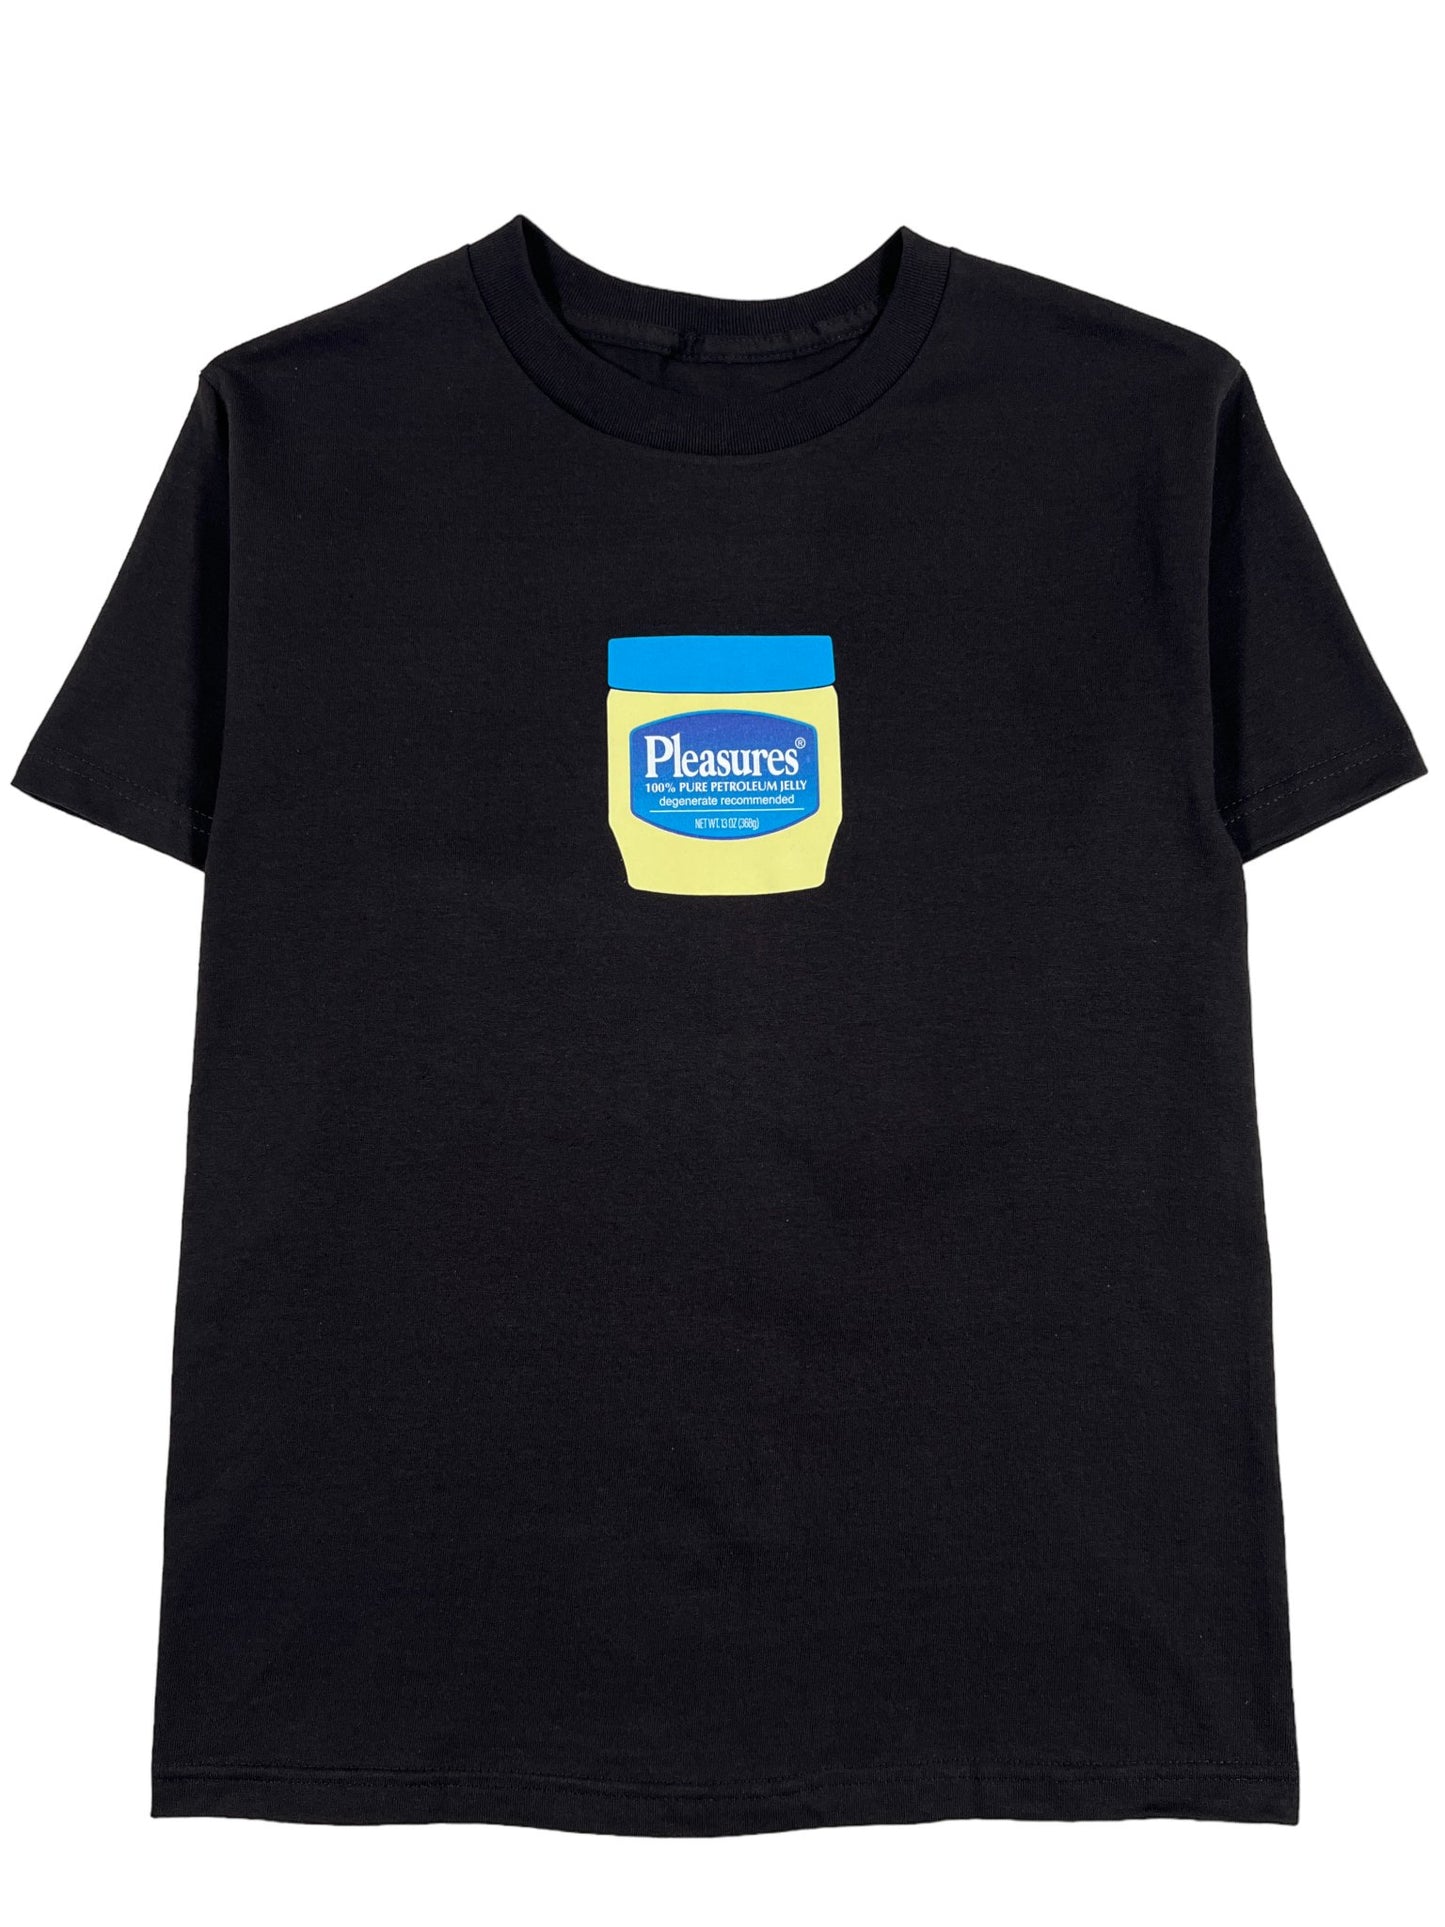 A stylish PLEASURES JELLY T-SHIRT BLACK with a graphic logo on it.